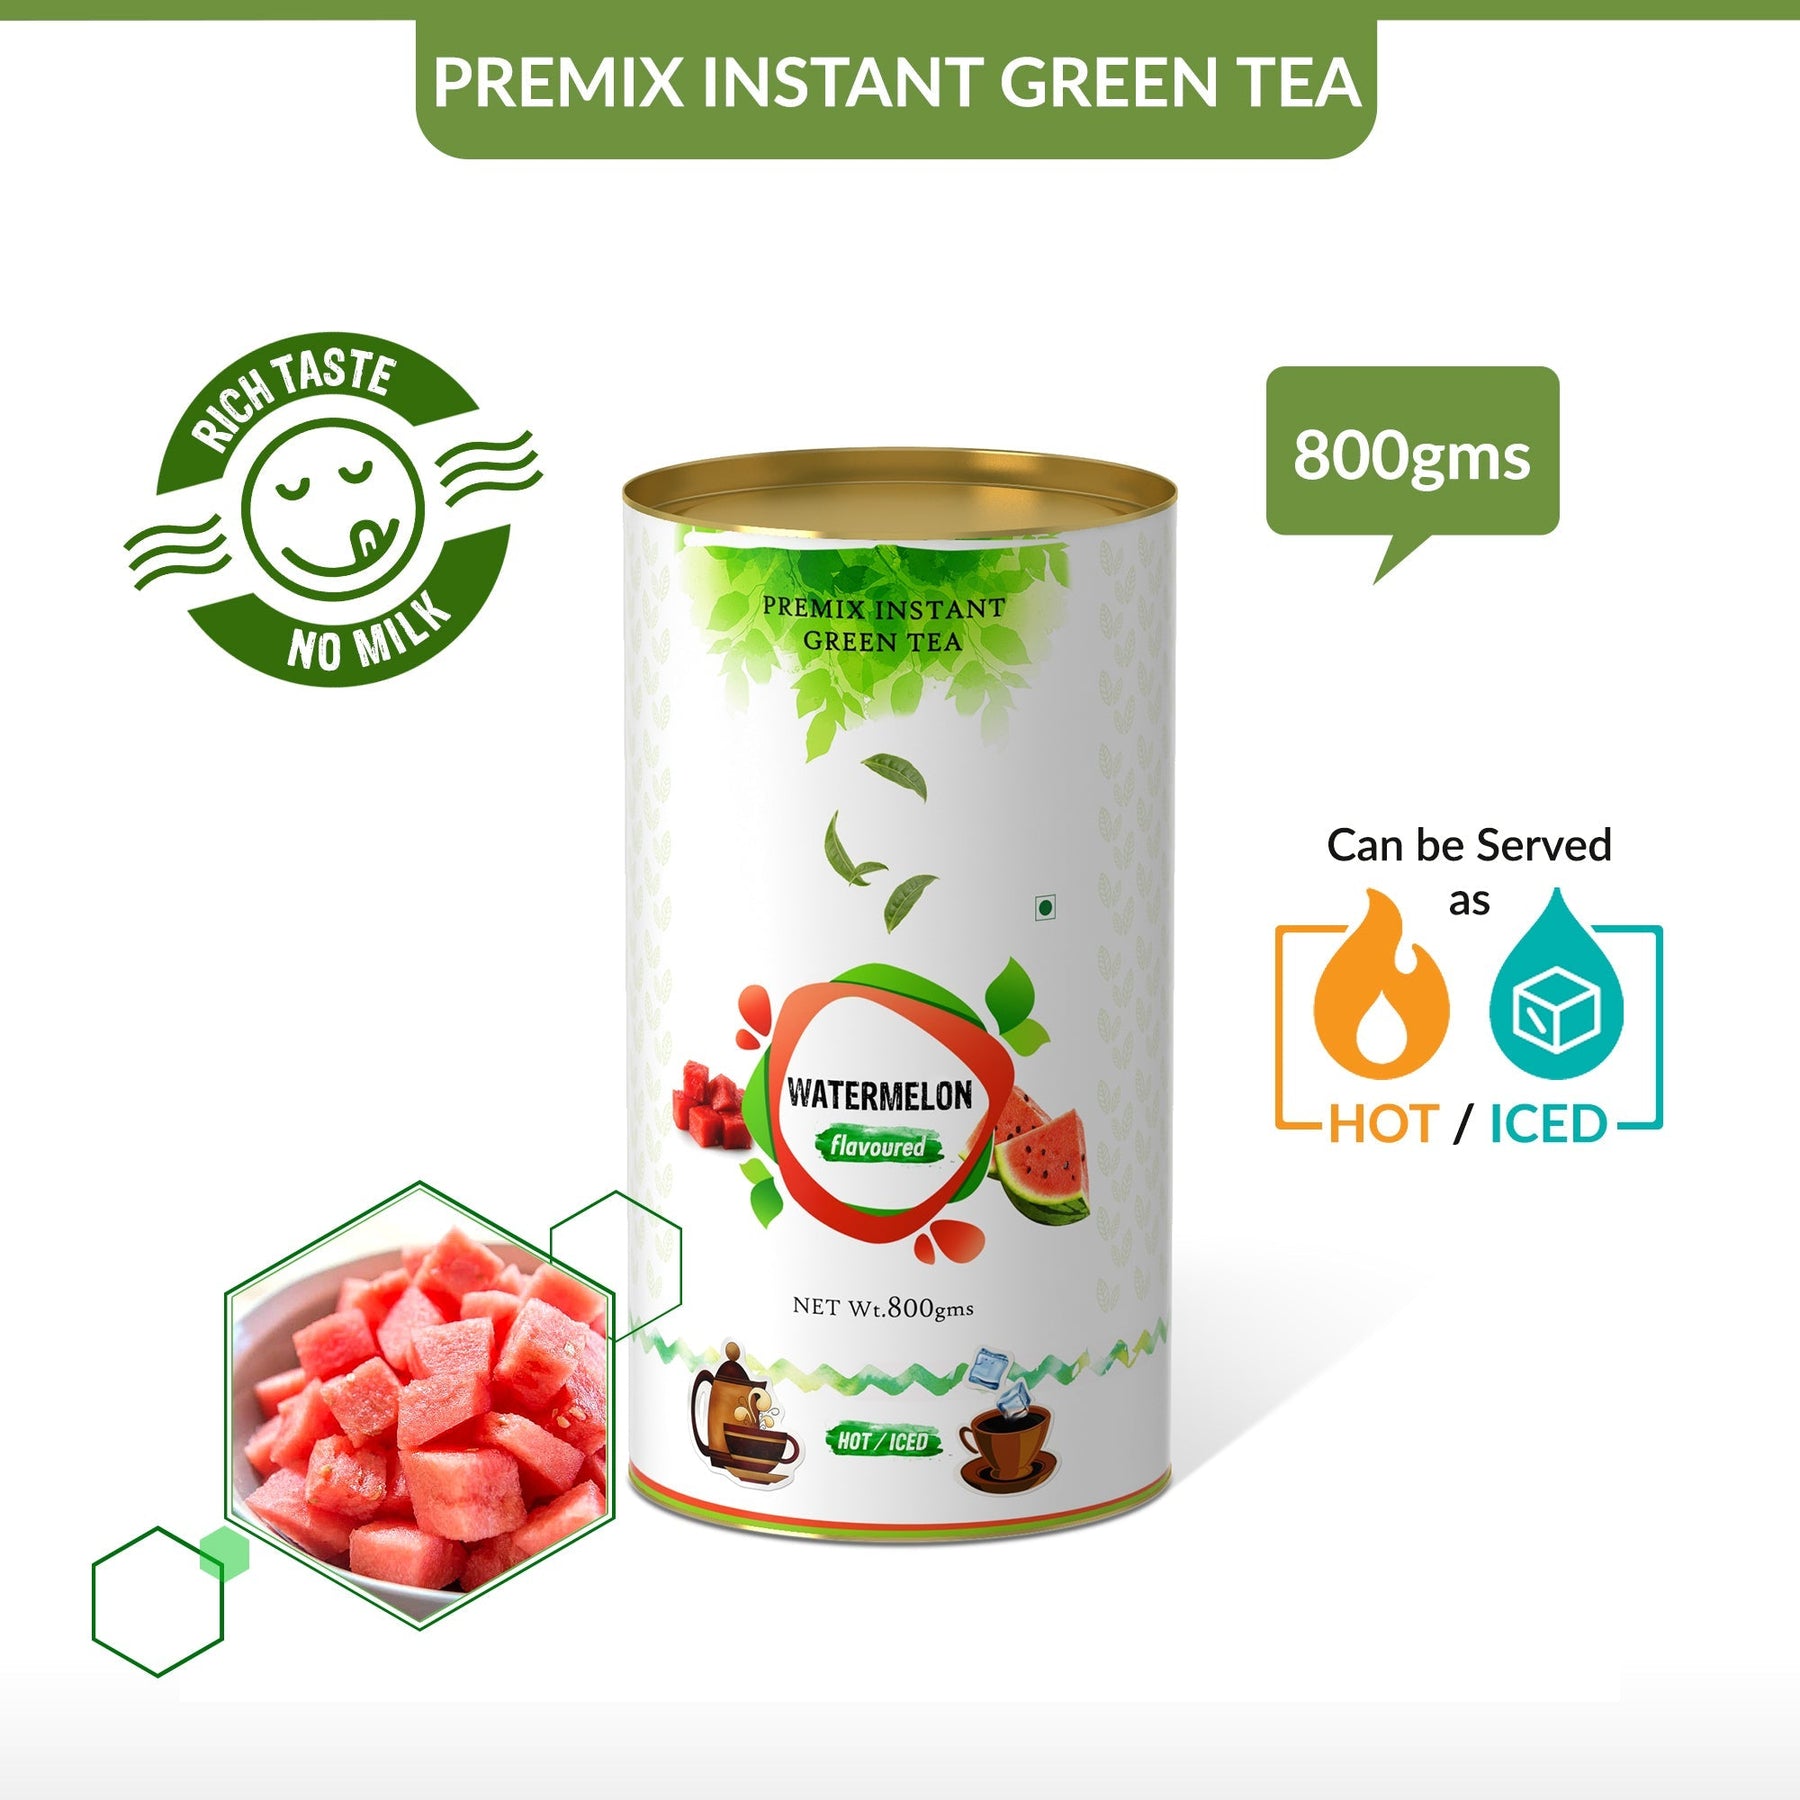 Watermelon Flavored Instant Green Tea - 400 gms